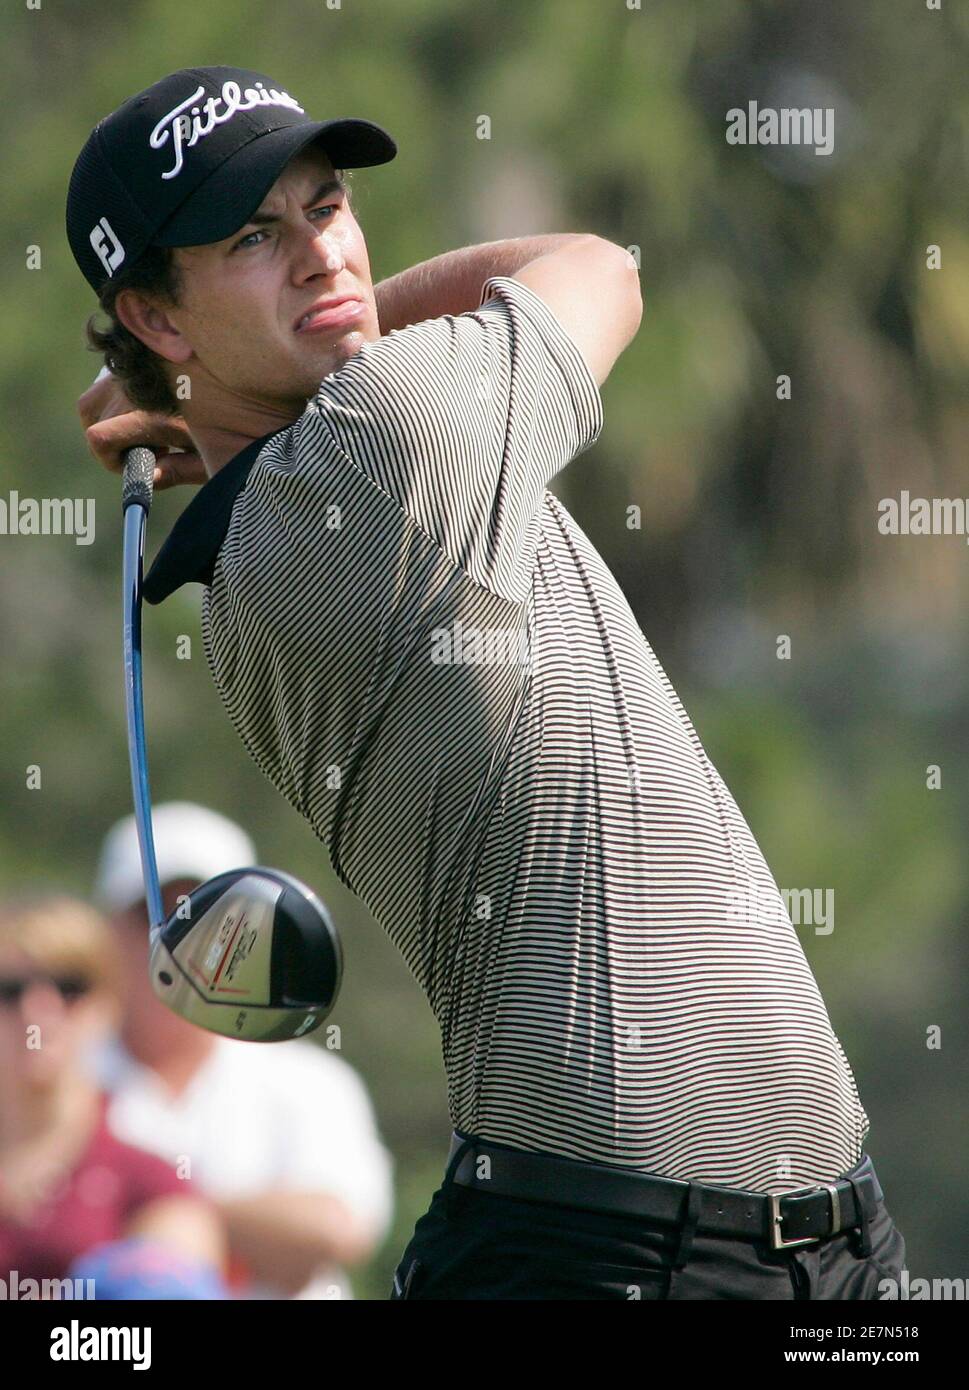 Adam Scott of Australia tees off on the 16th hole during the second round of play at The Players Championship golf tournament in Ponte Vedra Beach, Florida on May 11, 2007. REUTERS/Rick Fowler (UNITED STATES) Stock Photo